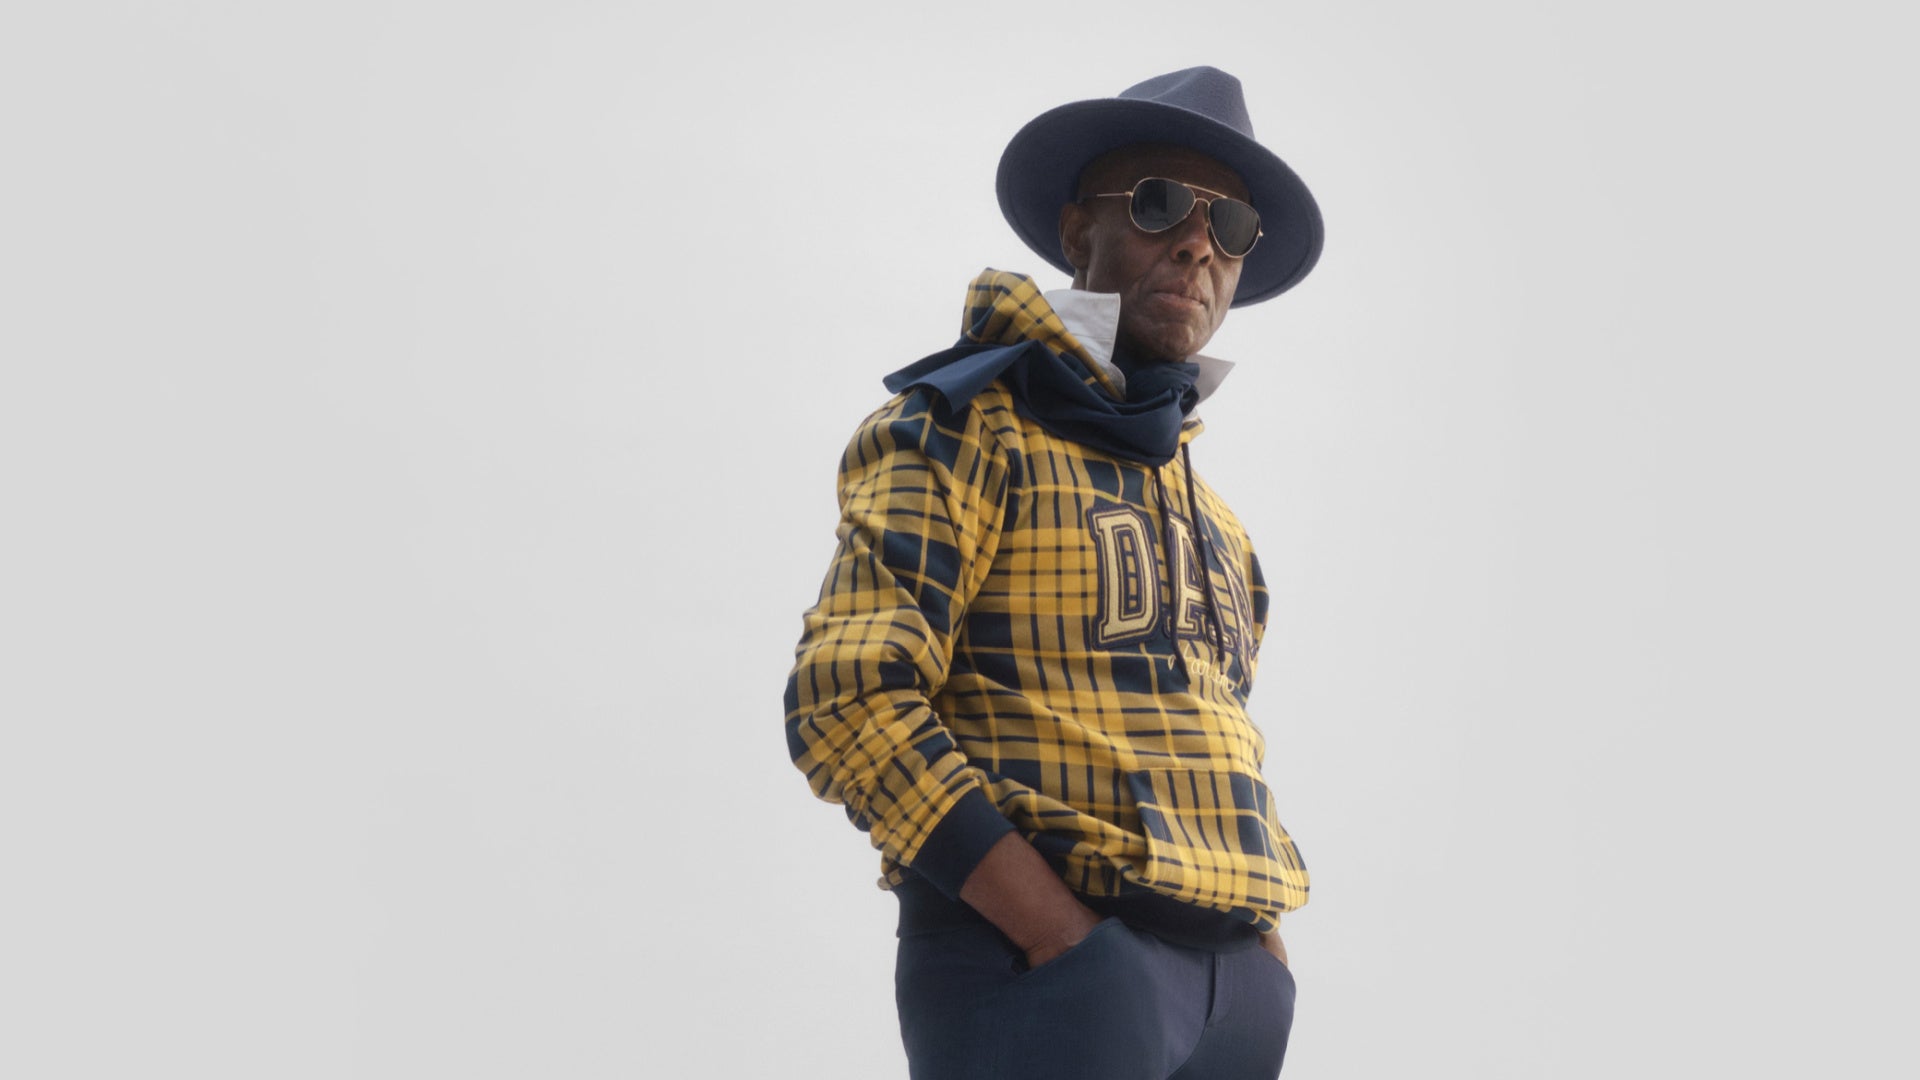 Future Apparel - Dapper Dan - The OG uplcyler of clothes 👊 - If you don't  know who Dapper Dan is he is the pioneer of hip hop streetwear and an  original